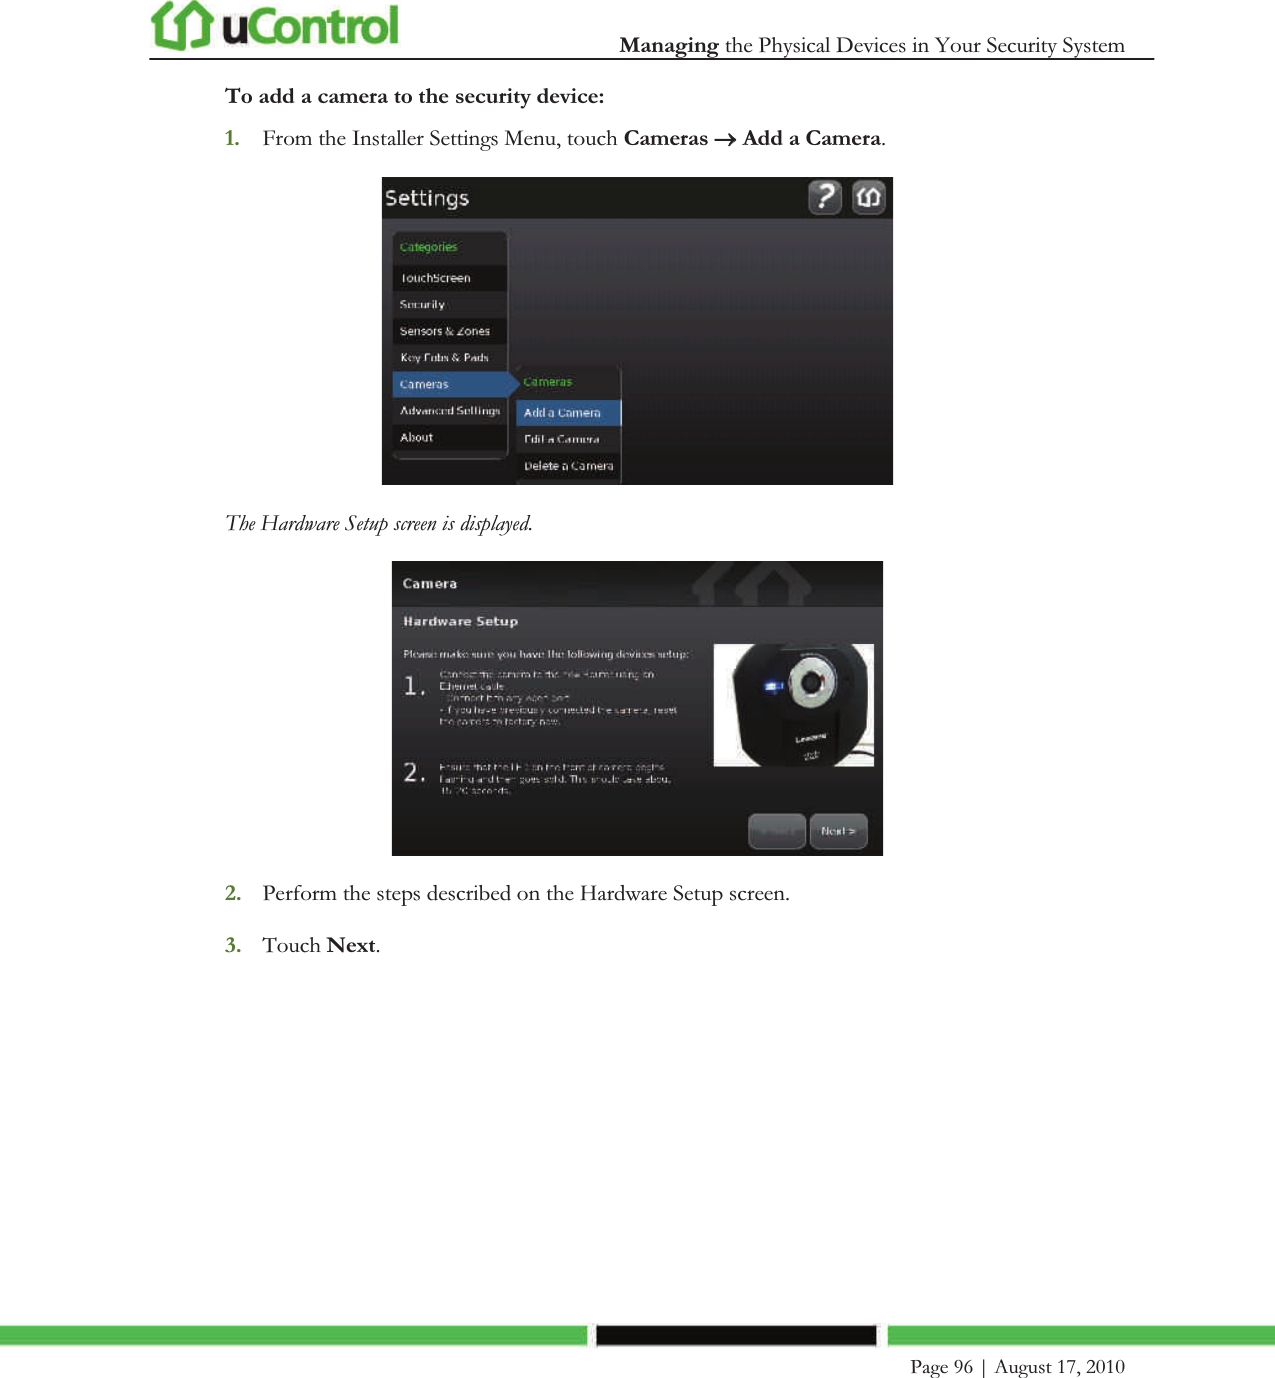  Managing the Physical Devices in Your Security System    Page 96 | August 17, 2010   To add a camera to the security device: 1. From the Installer Settings Menu, touch Cameras o Add a Camera.  The Hardware Setup screen is displayed.  2. Perform the steps described on the Hardware Setup screen. 3. Touch Next. 